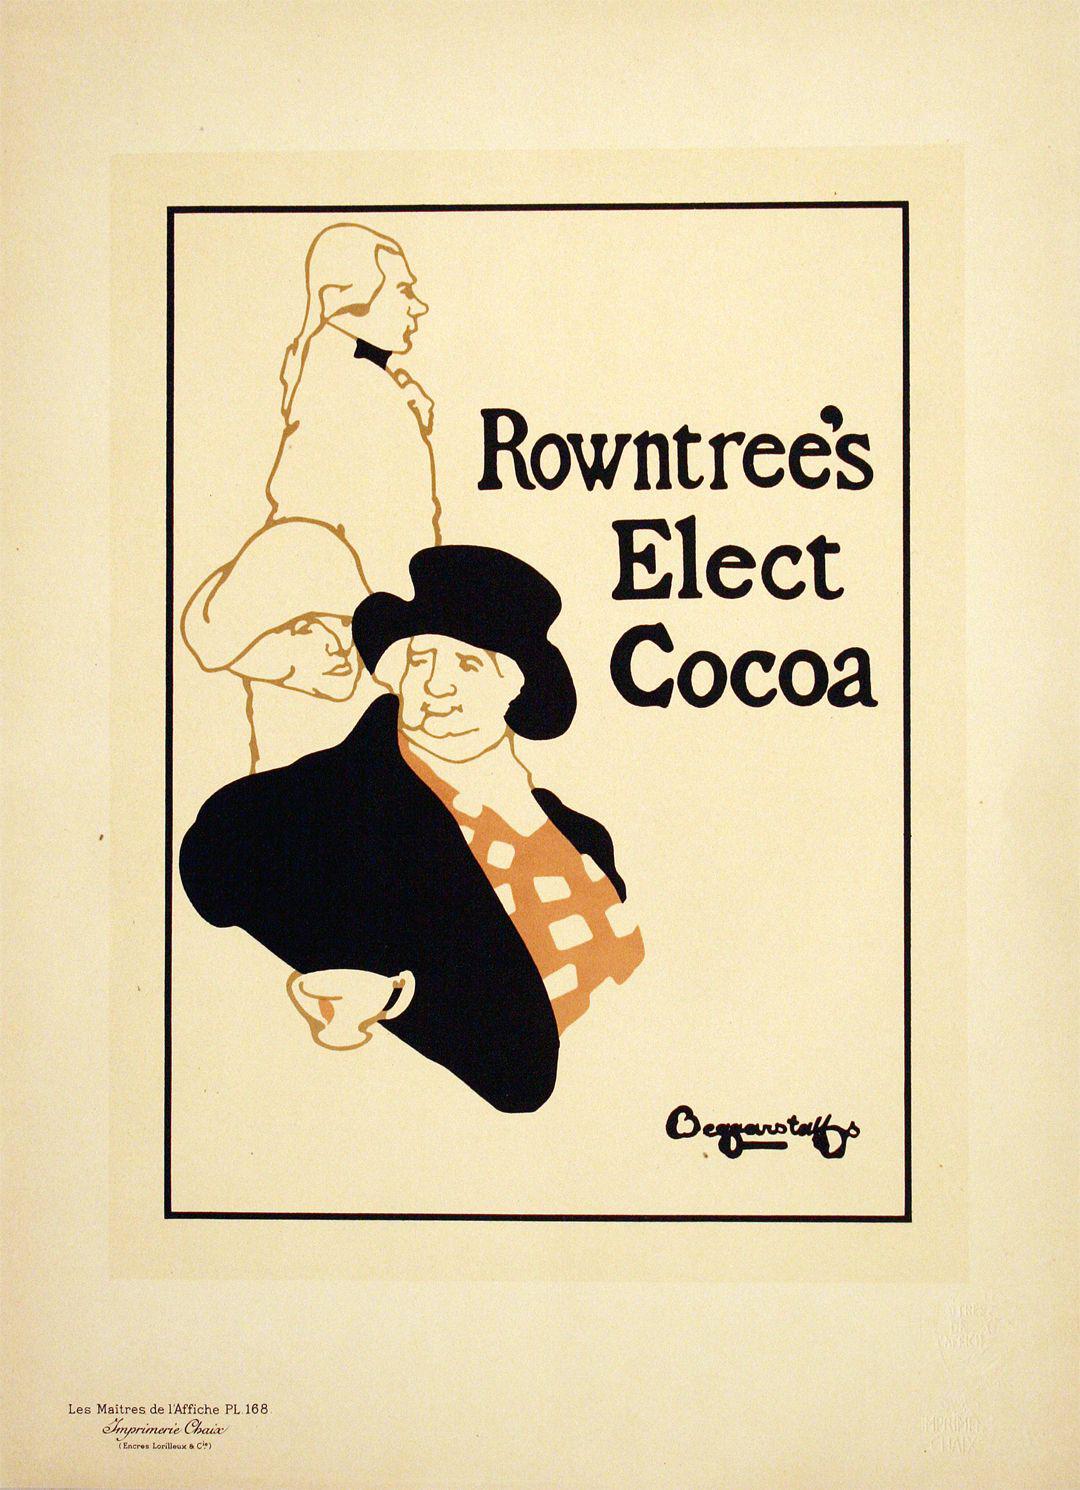 Original Maitres de L'Affiche - PL 168 by Beggarstaff Brothers 1899 Rowntree's Elect Cocoa